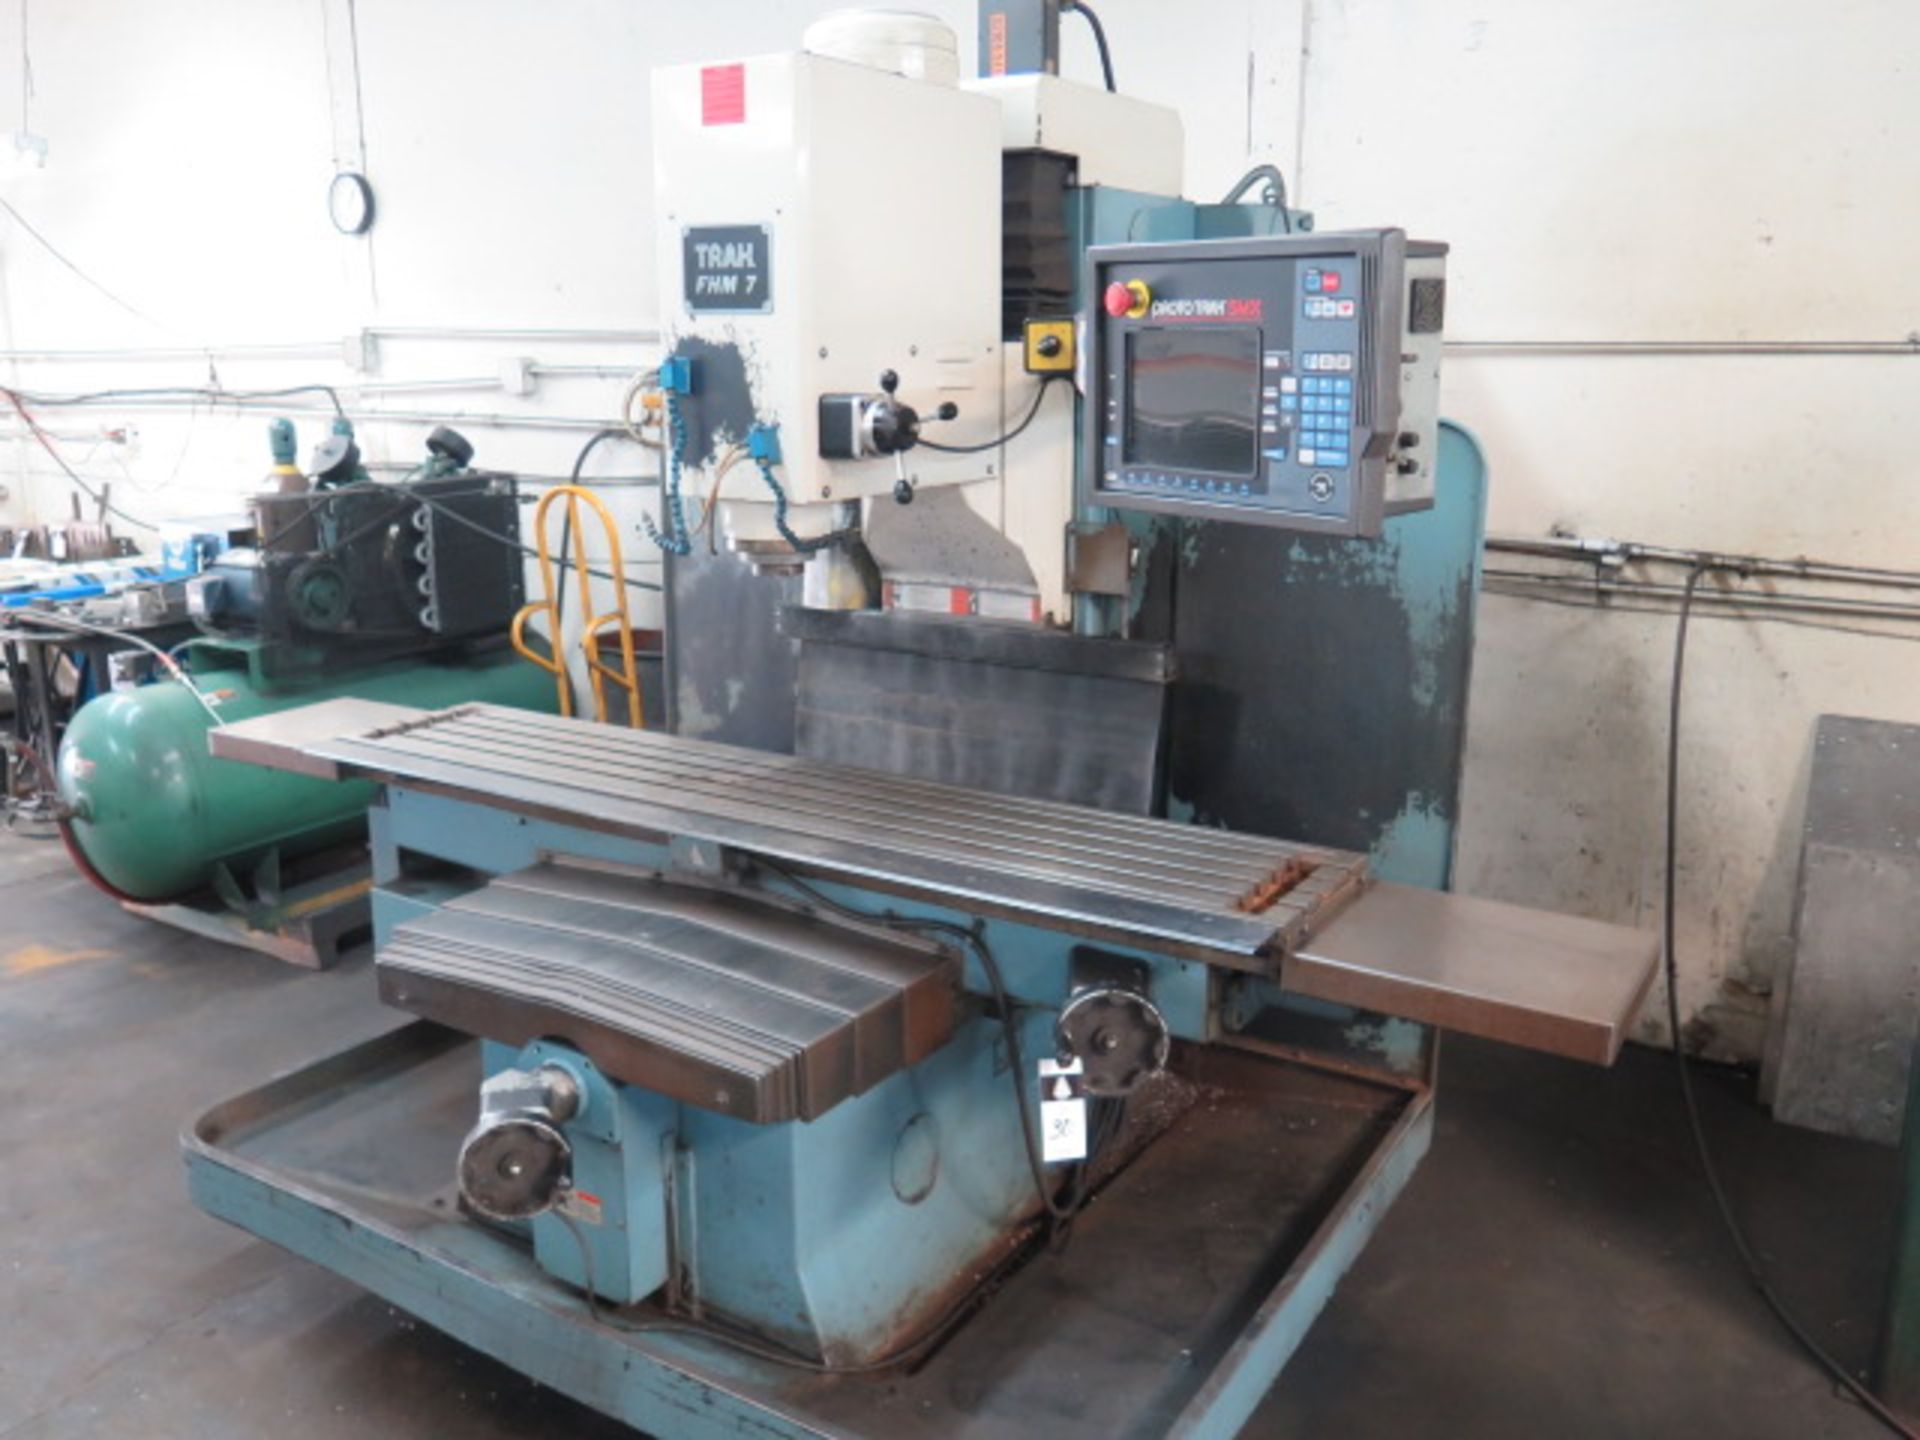 Trak FHM 7 CNC Vertical Machining Center s/n 124CY453188 w/ Proto Trak SMX Controls, SOLD AS IS - Image 3 of 20